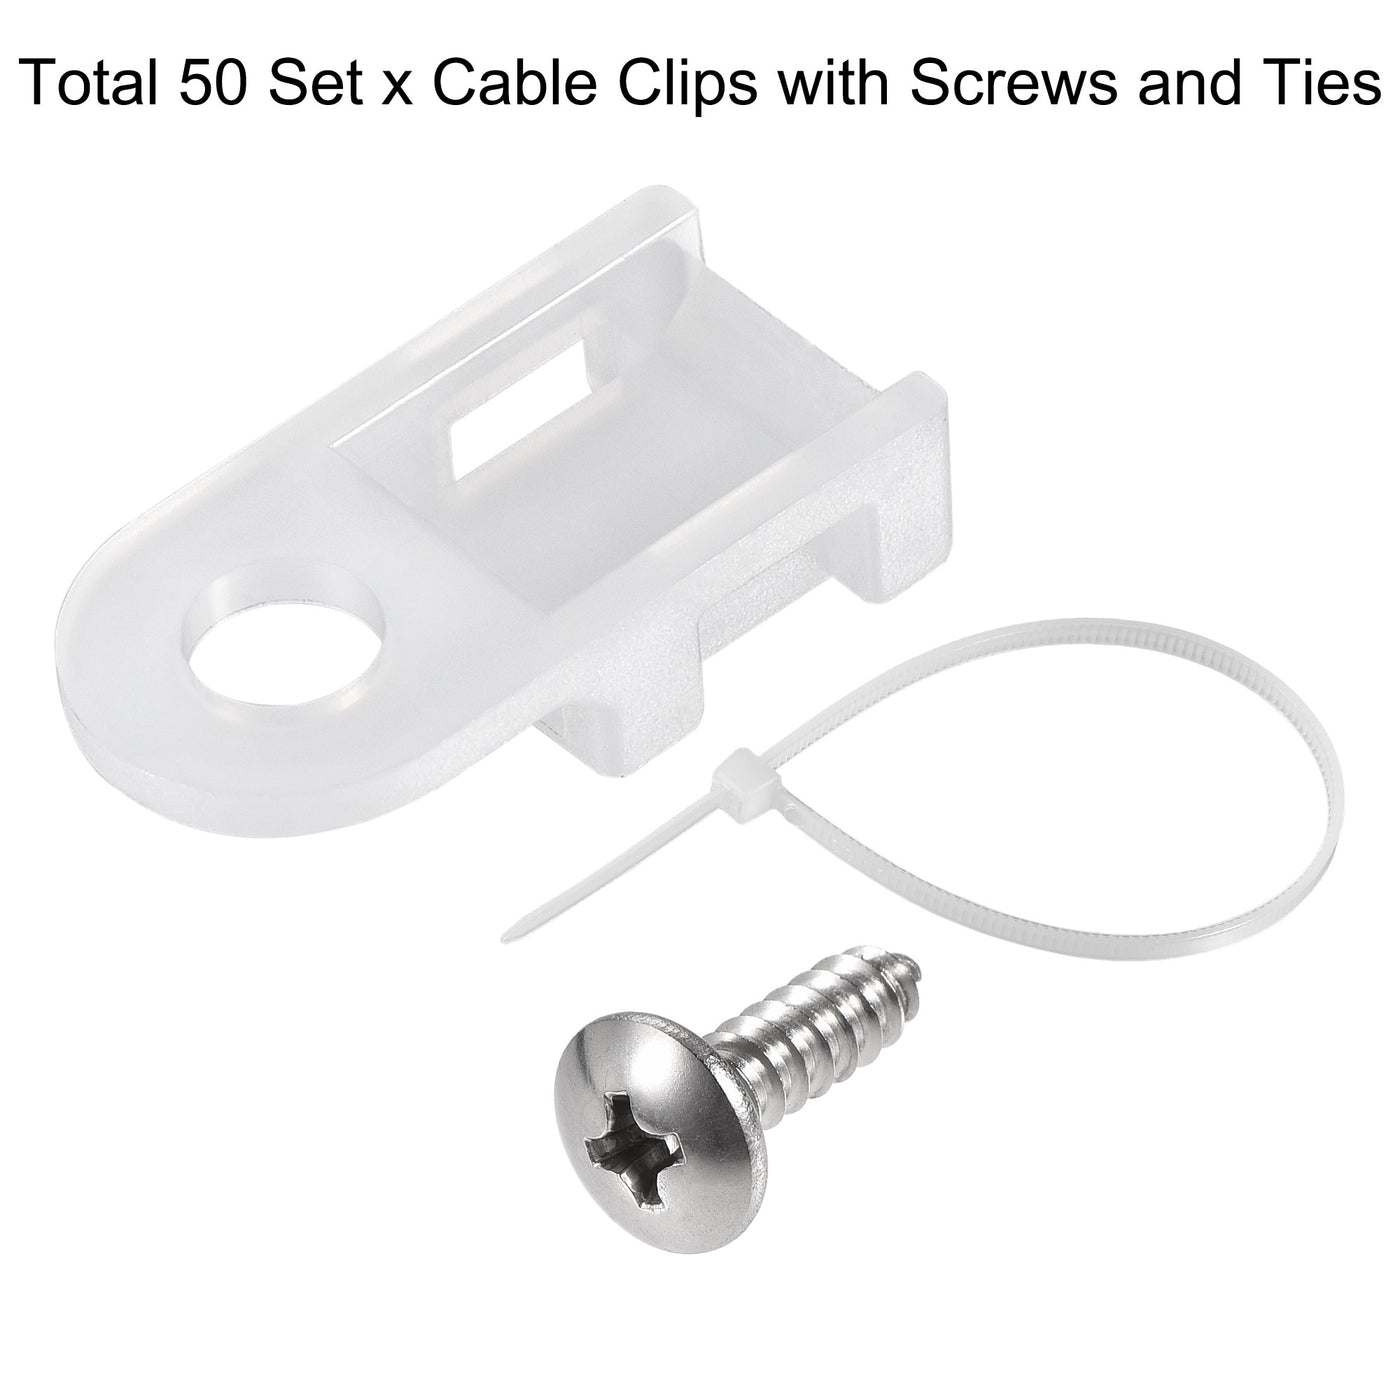 uxcell Uxcell 19mm x 9mm x 4.6mm Nylon Cable Fasten Clip with Screws and Ties White 50 Set